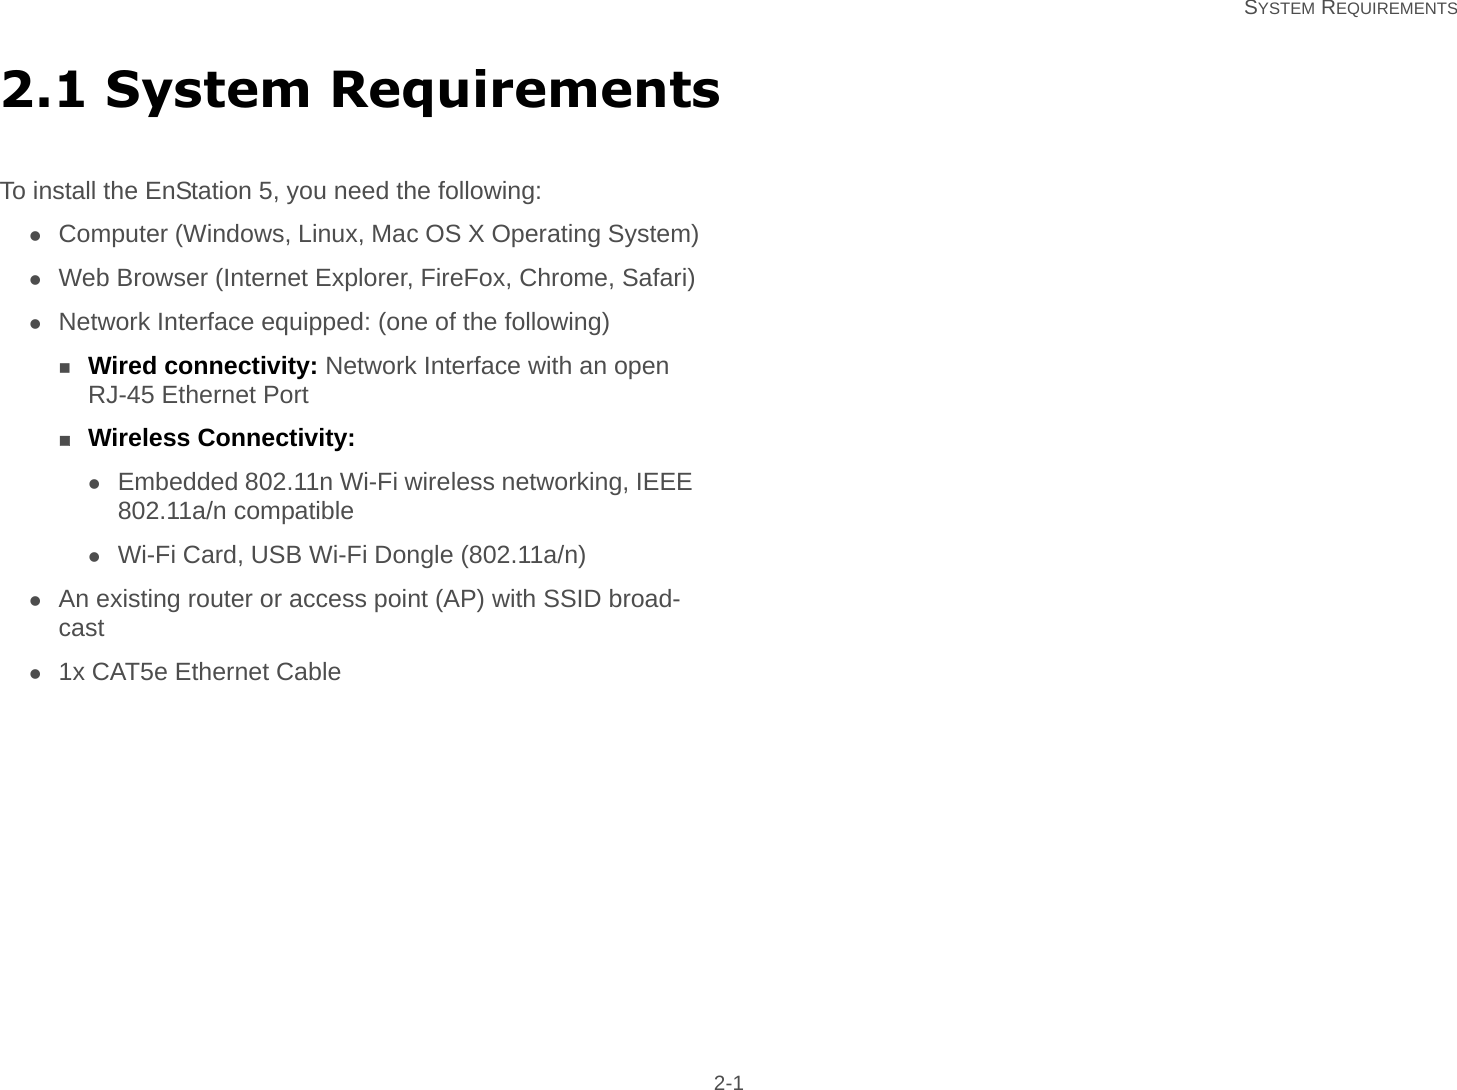   SYSTEM REQUIREMENTS 2-12.1 System RequirementsTo install the EnStation 5, you need the following:Computer (Windows, Linux, Mac OS X Operating System)Web Browser (Internet Explorer, FireFox, Chrome, Safari)Network Interface equipped: (one of the following)Wired connectivity: Network Interface with an open RJ-45 Ethernet PortWireless Connectivity:Embedded 802.11n Wi-Fi wireless networking, IEEE 802.11a/n compatibleWi-Fi Card, USB Wi-Fi Dongle (802.11a/n)An existing router or access point (AP) with SSID broad-cast1x CAT5e Ethernet Cable